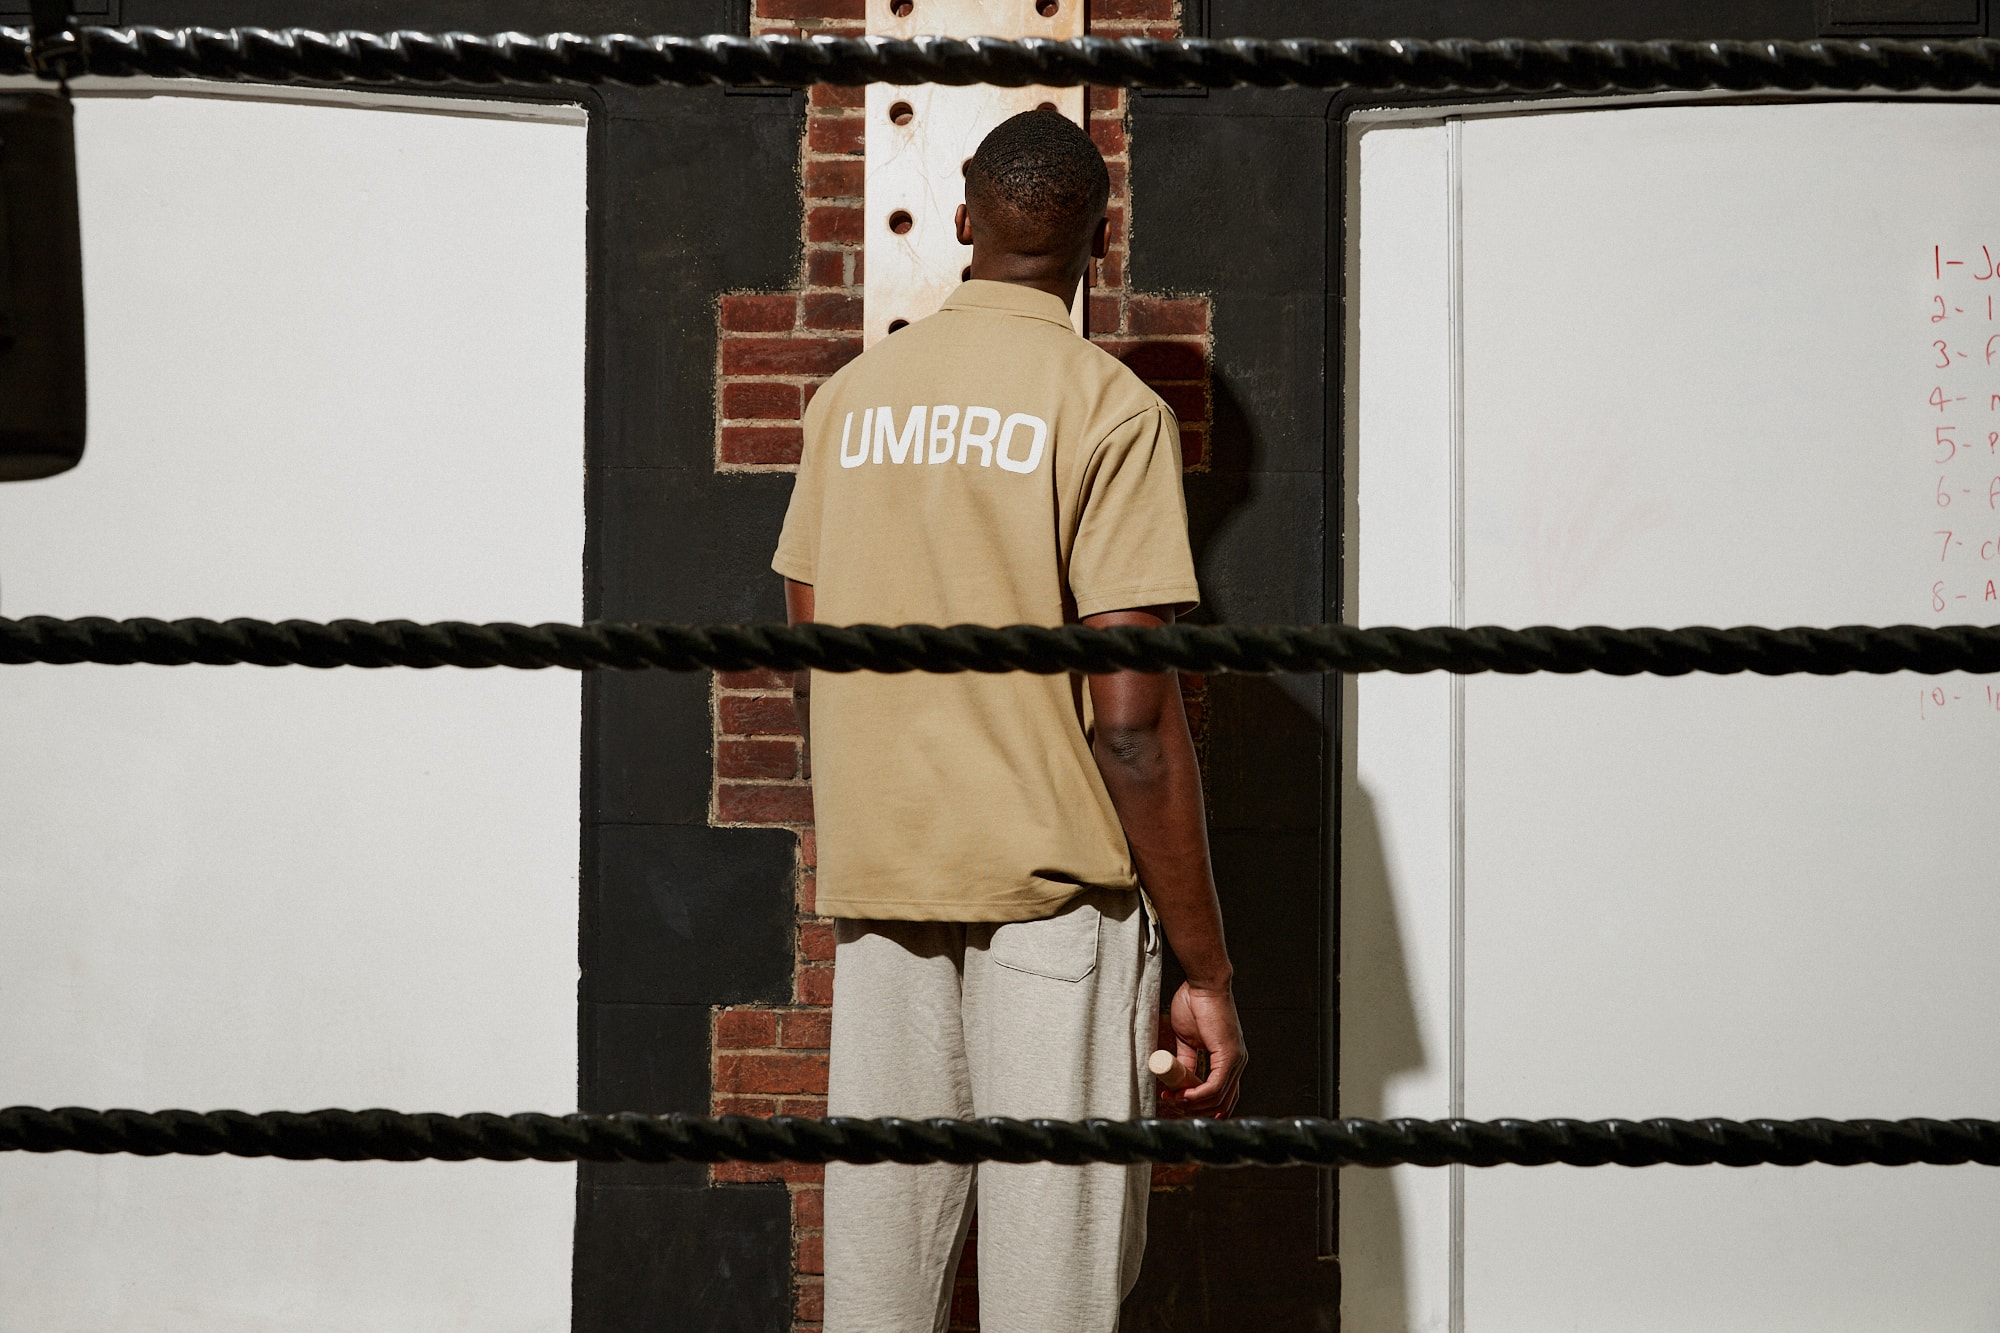 Umbro Nigel Cabourn army gym design training gear military UMBRO british track suits drill top shorts pants release info date